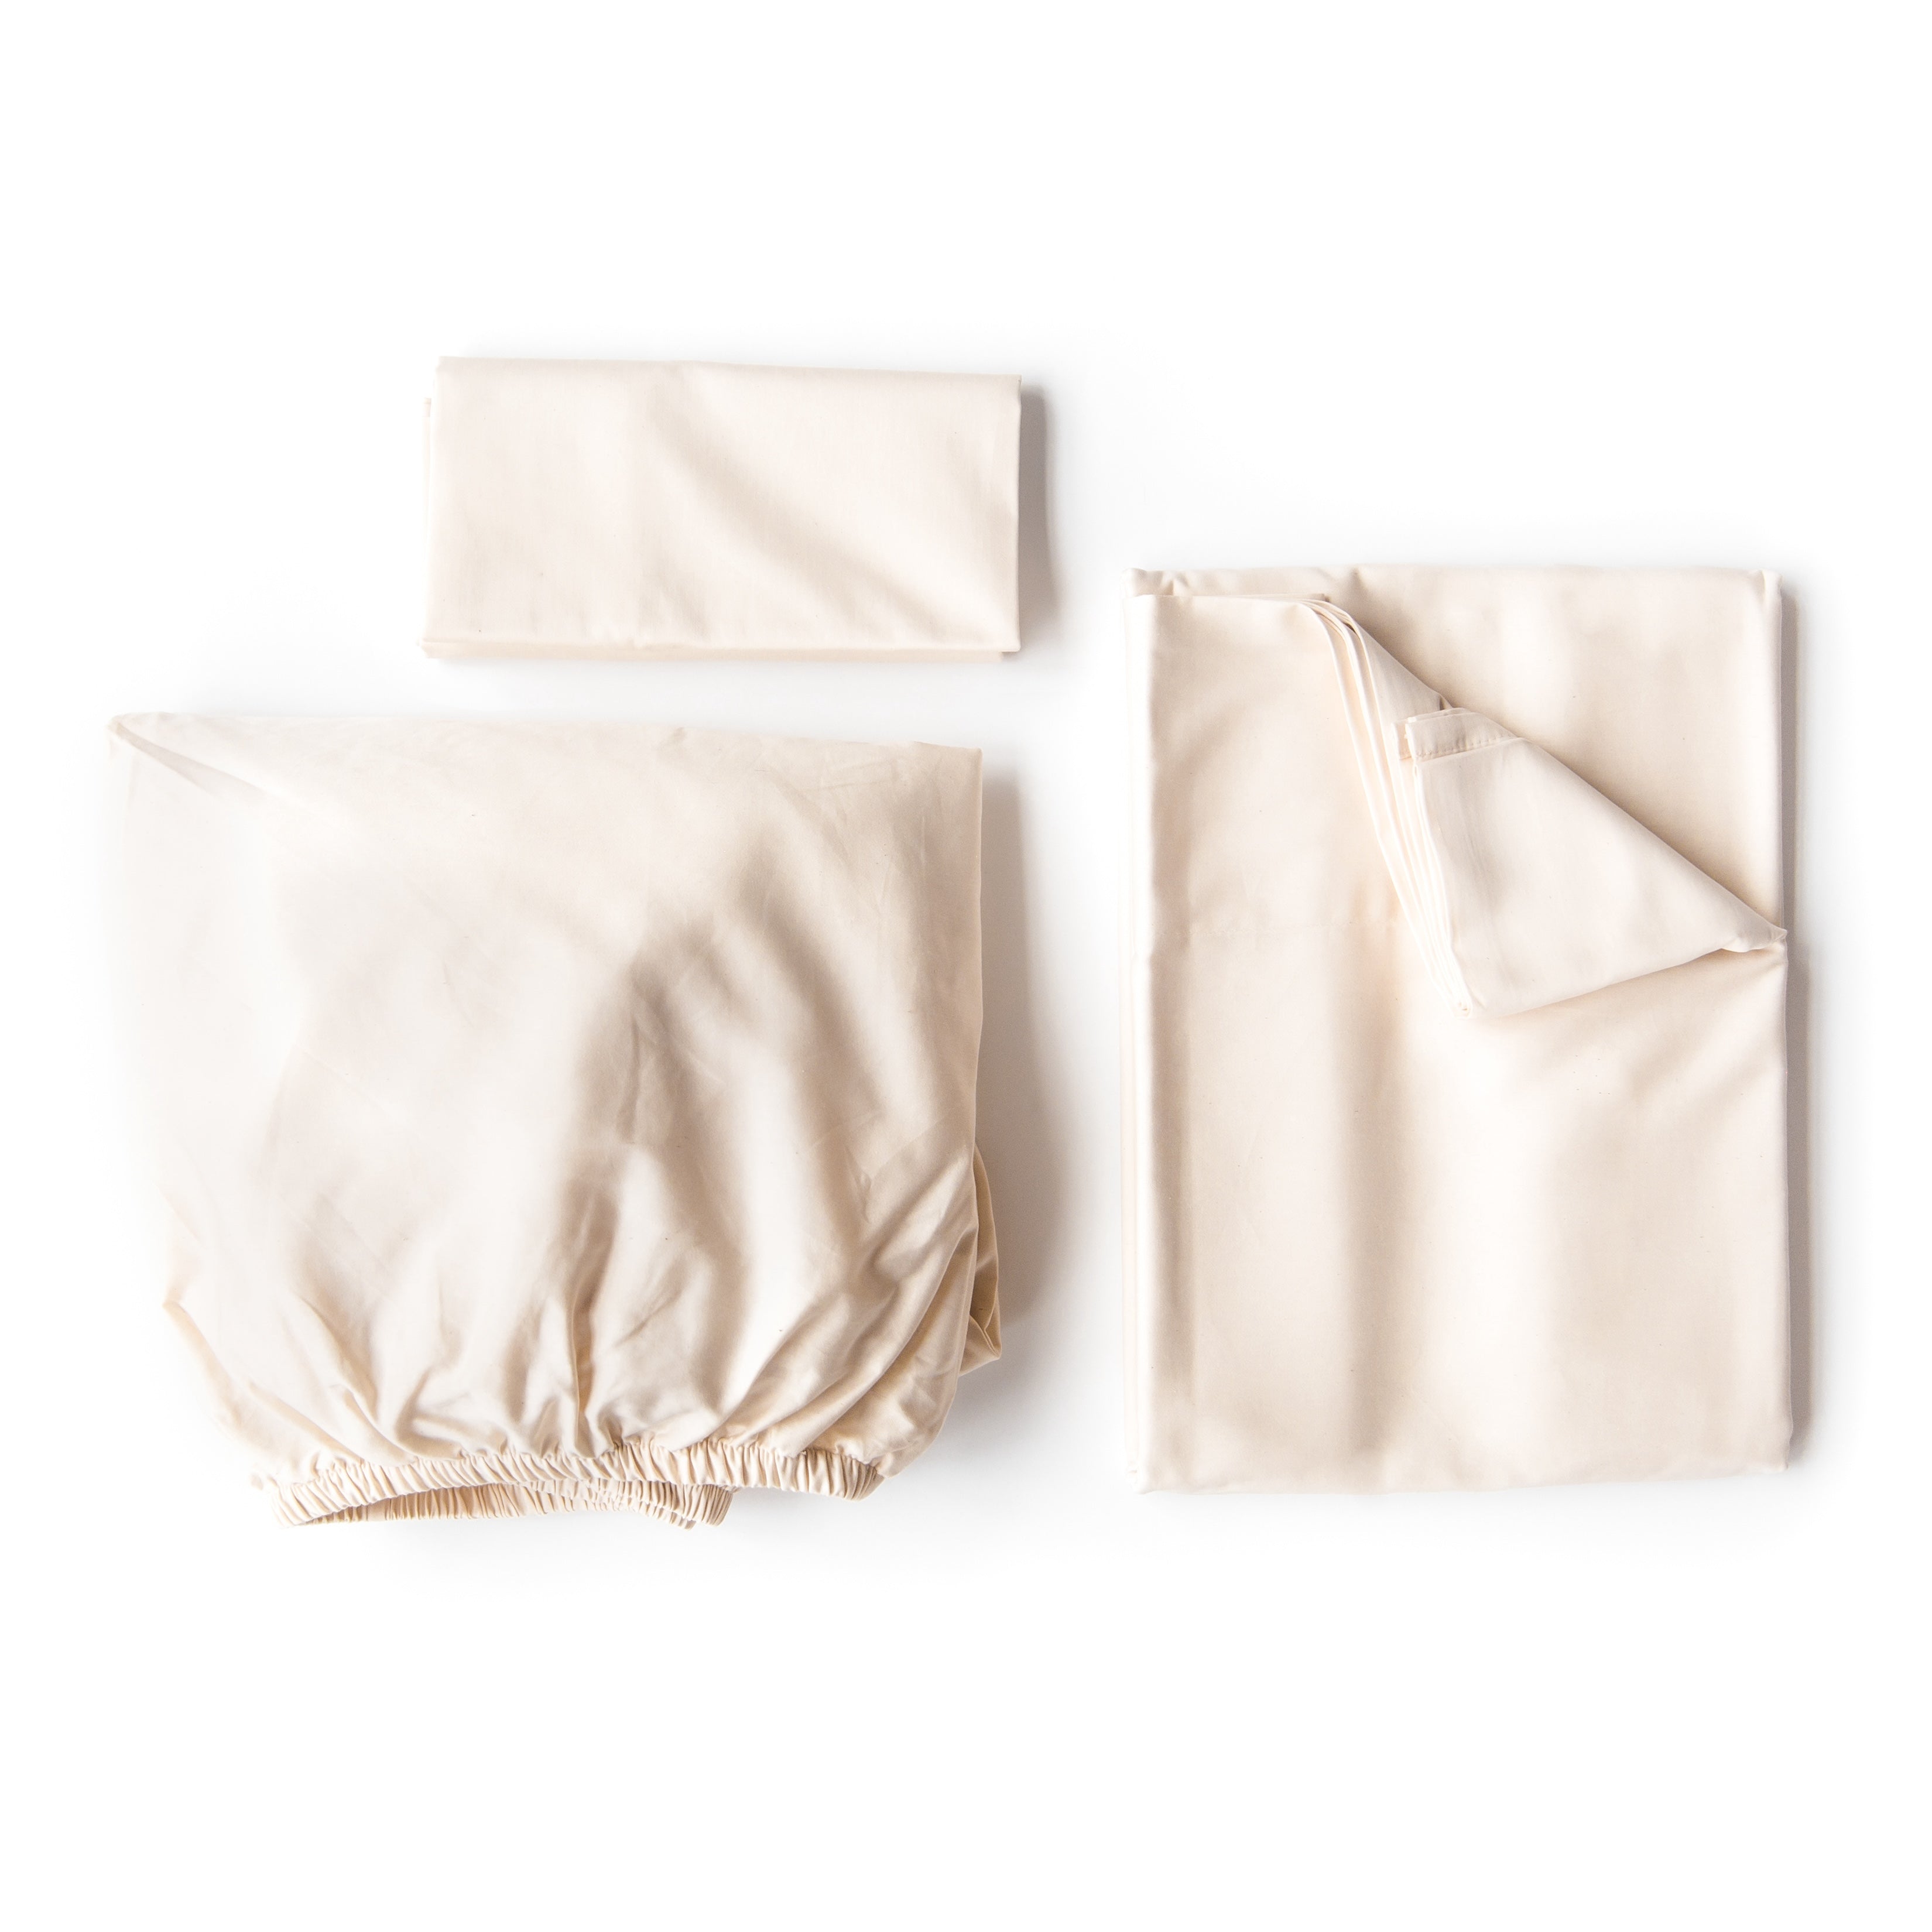 Oolie organic cotton pillowcases, flat sheet, and fitted sheet in natural, unbleached cotton, folded flat on a white background.